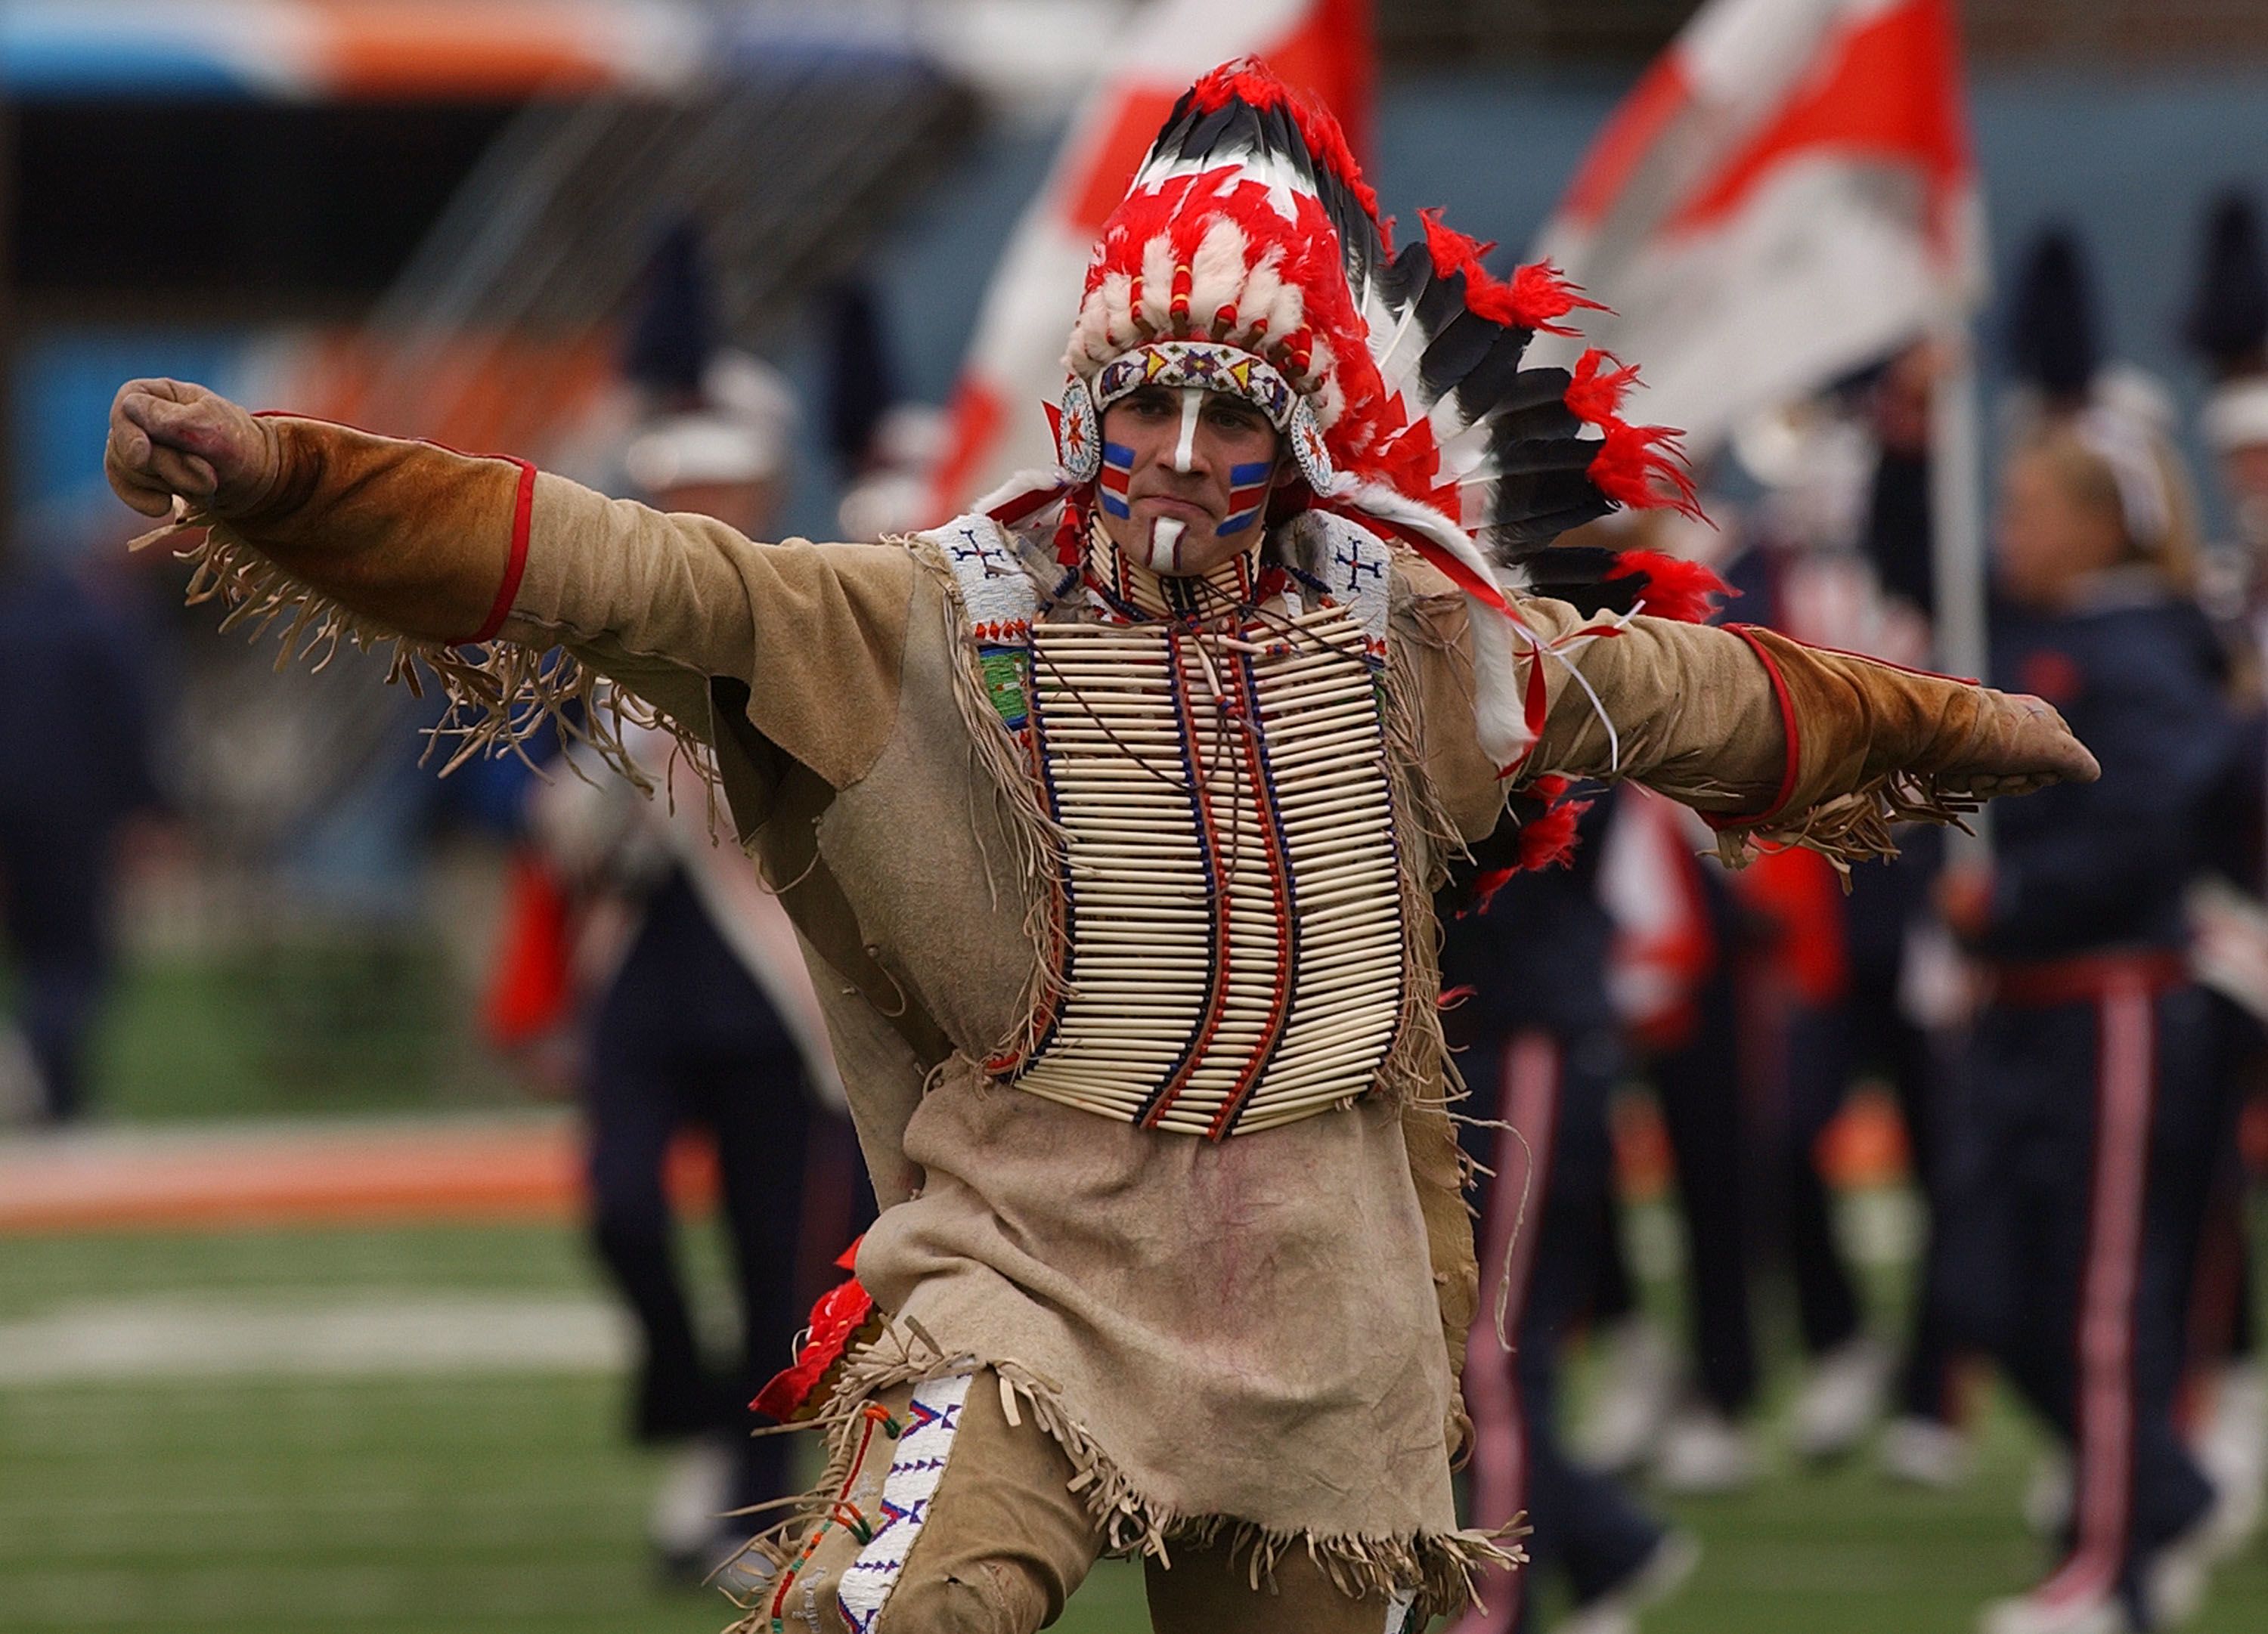 The 2,128 Native American Mascots People Aren't Talking About